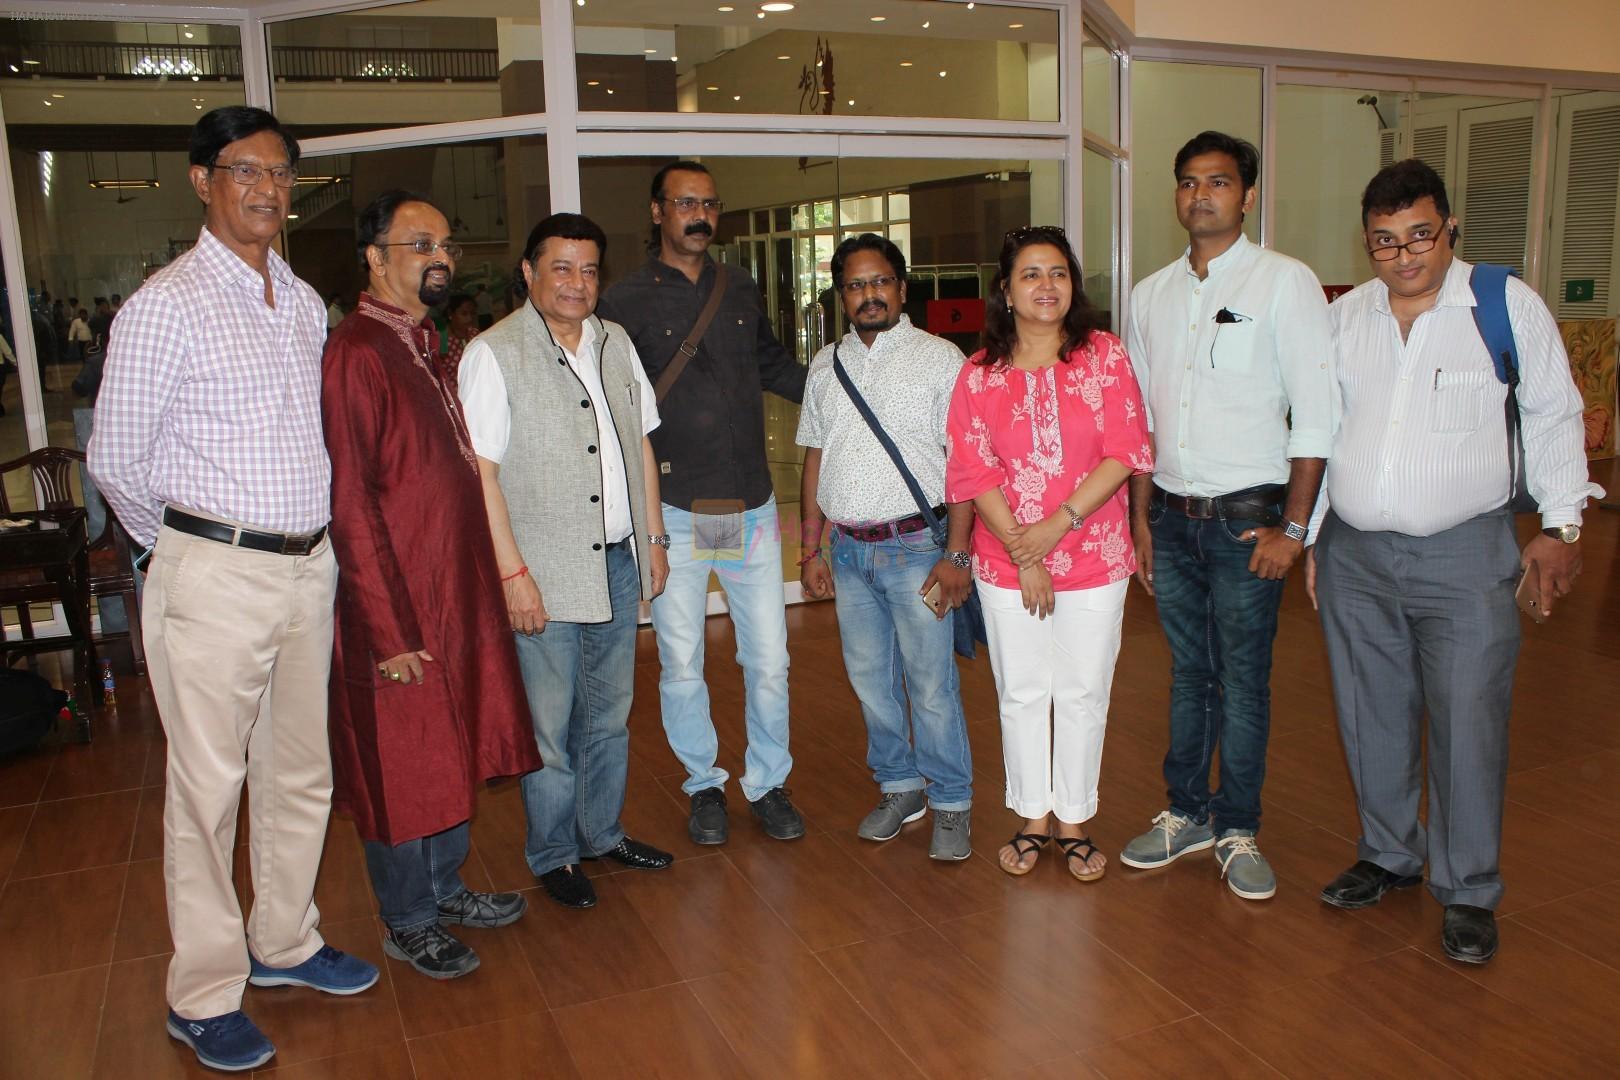 Anup Jalota Inaugurates Kishore M Sali's See The Unseen Art Show on 6th June 2017